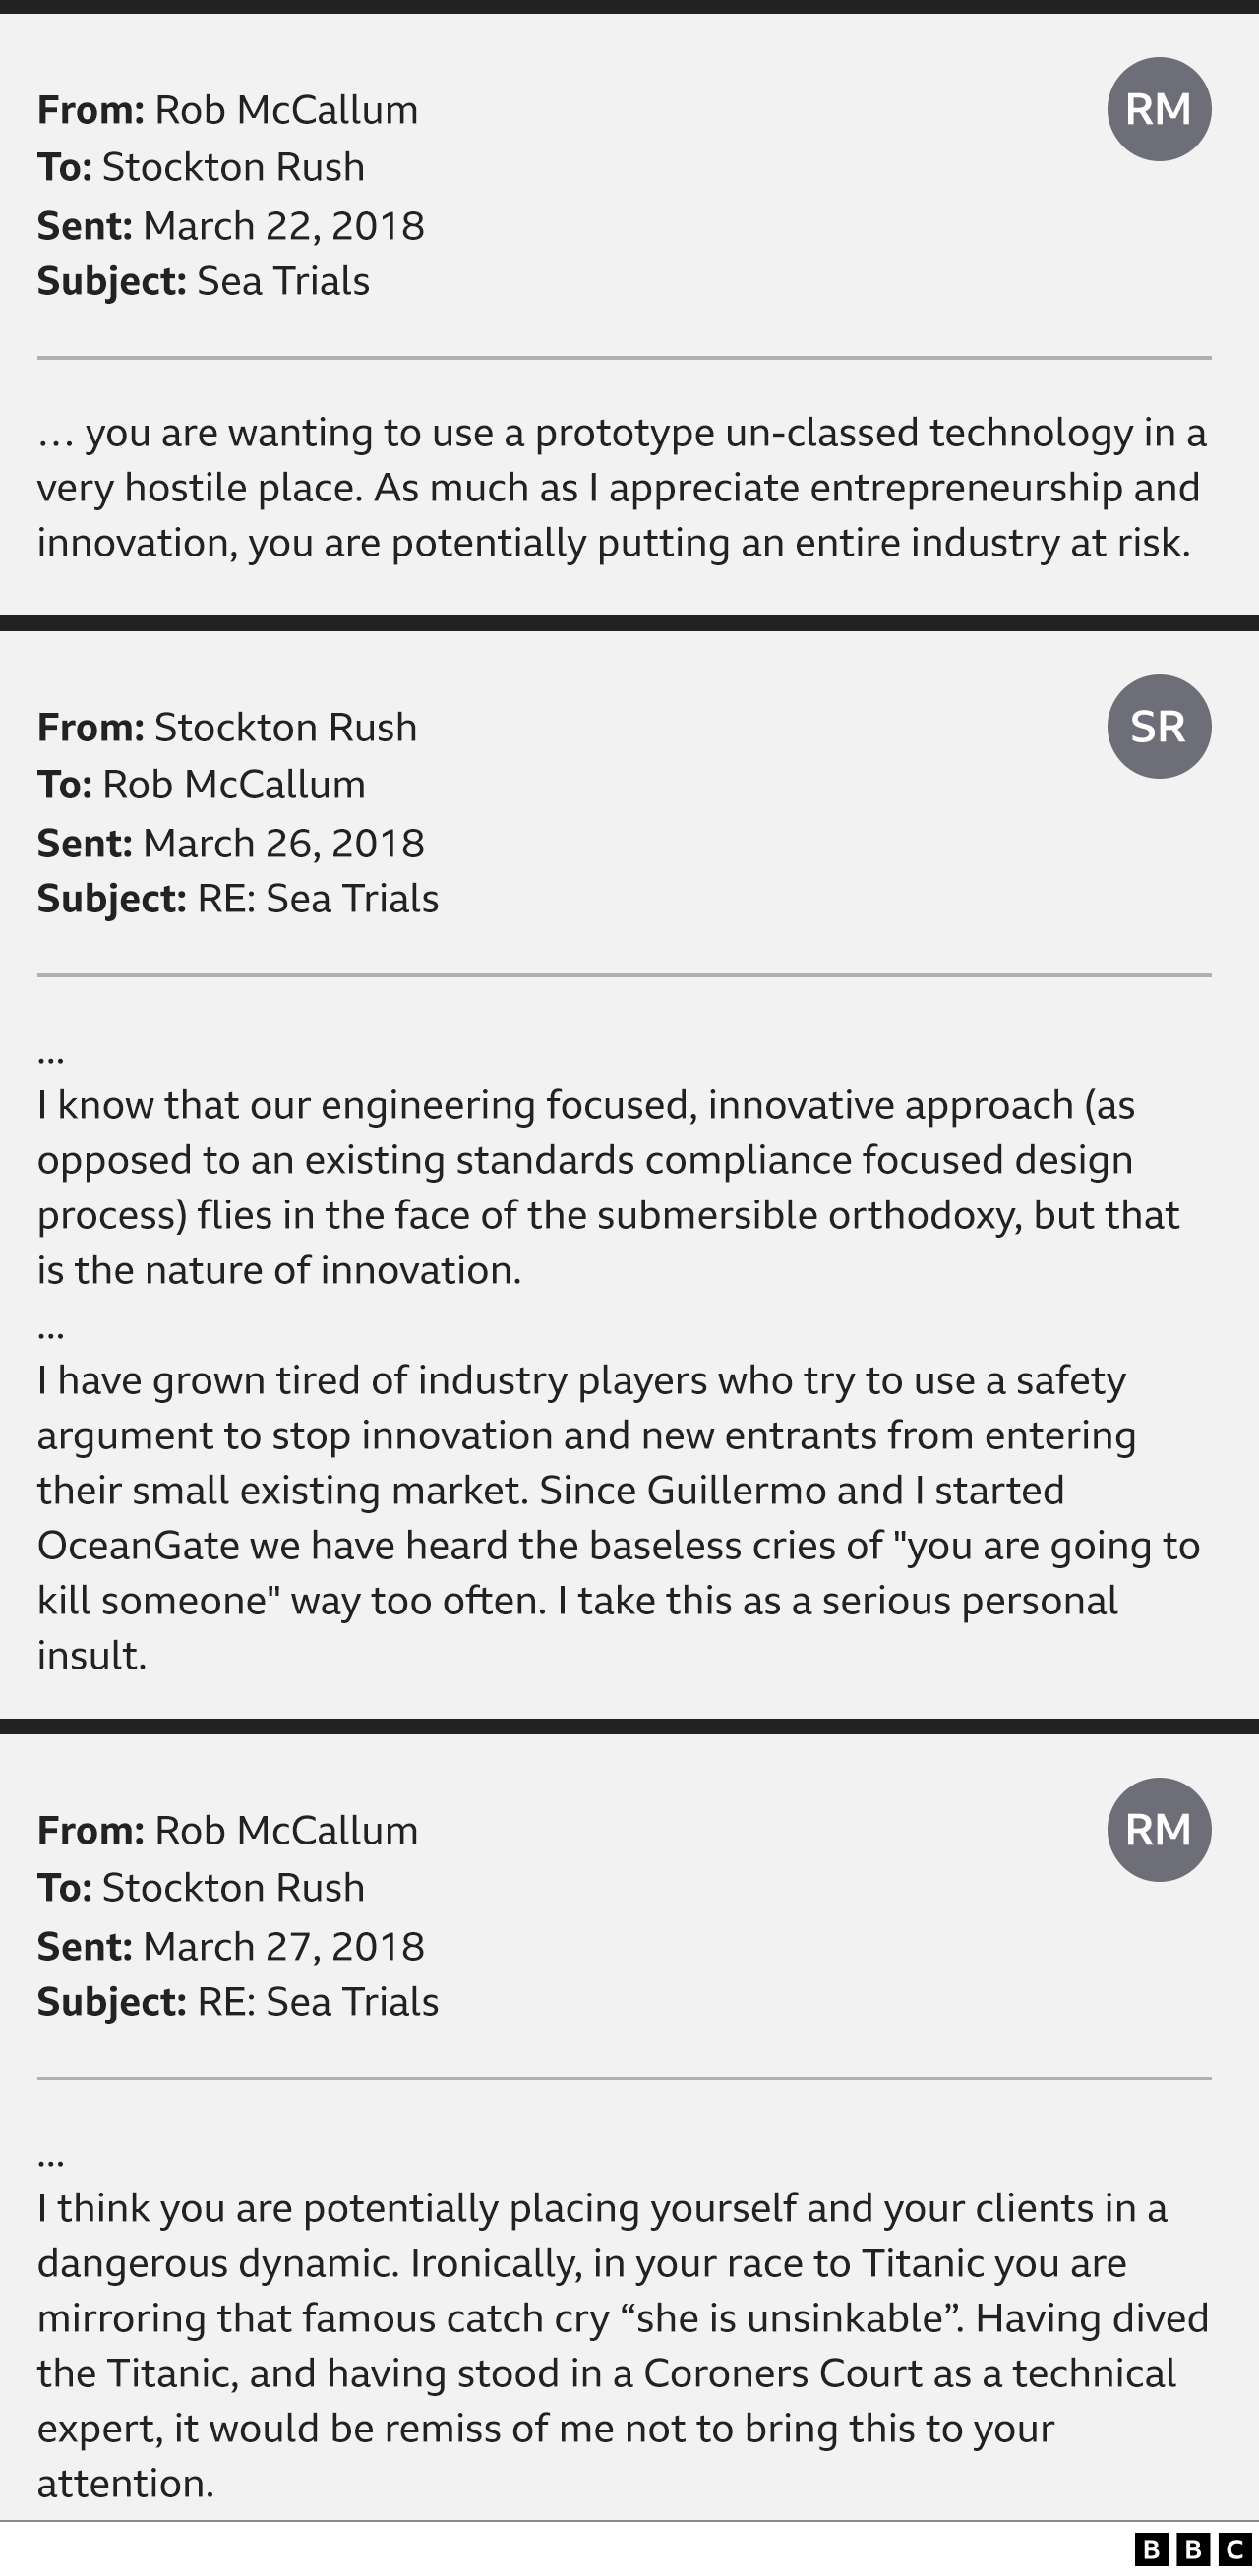 Graphic showing excerpts from emails between Rob McCallum and Stockton Rush. “You are wanting to use a prototype un-classed technology in a very hostile place. As much as I appreciate entrepreneurship and innovation, you are potentially putting an entire industry at risk.” In response, Mr Rush says: “I know that our engineering focused, innovative approach flies in the face of the submersible orthodoxy, but that is the nature of innovation.” He then adds: “I have grown tired of industry players who try to use a safety argument to stop innovation and new entrants from entering their small existing market. Since Guillermo and I started OceanGate we have heard the baseless cries of ‘you are going to kill someone’ way too often. I take this as a serious personal insult.” A reply from Mr McCallum says: “I think you are potentially placing yourself and your clients in a dangerous dynamic. Ironically, in your race to Titanic you are mirroring that famous catch cry ‘she is unsinkable